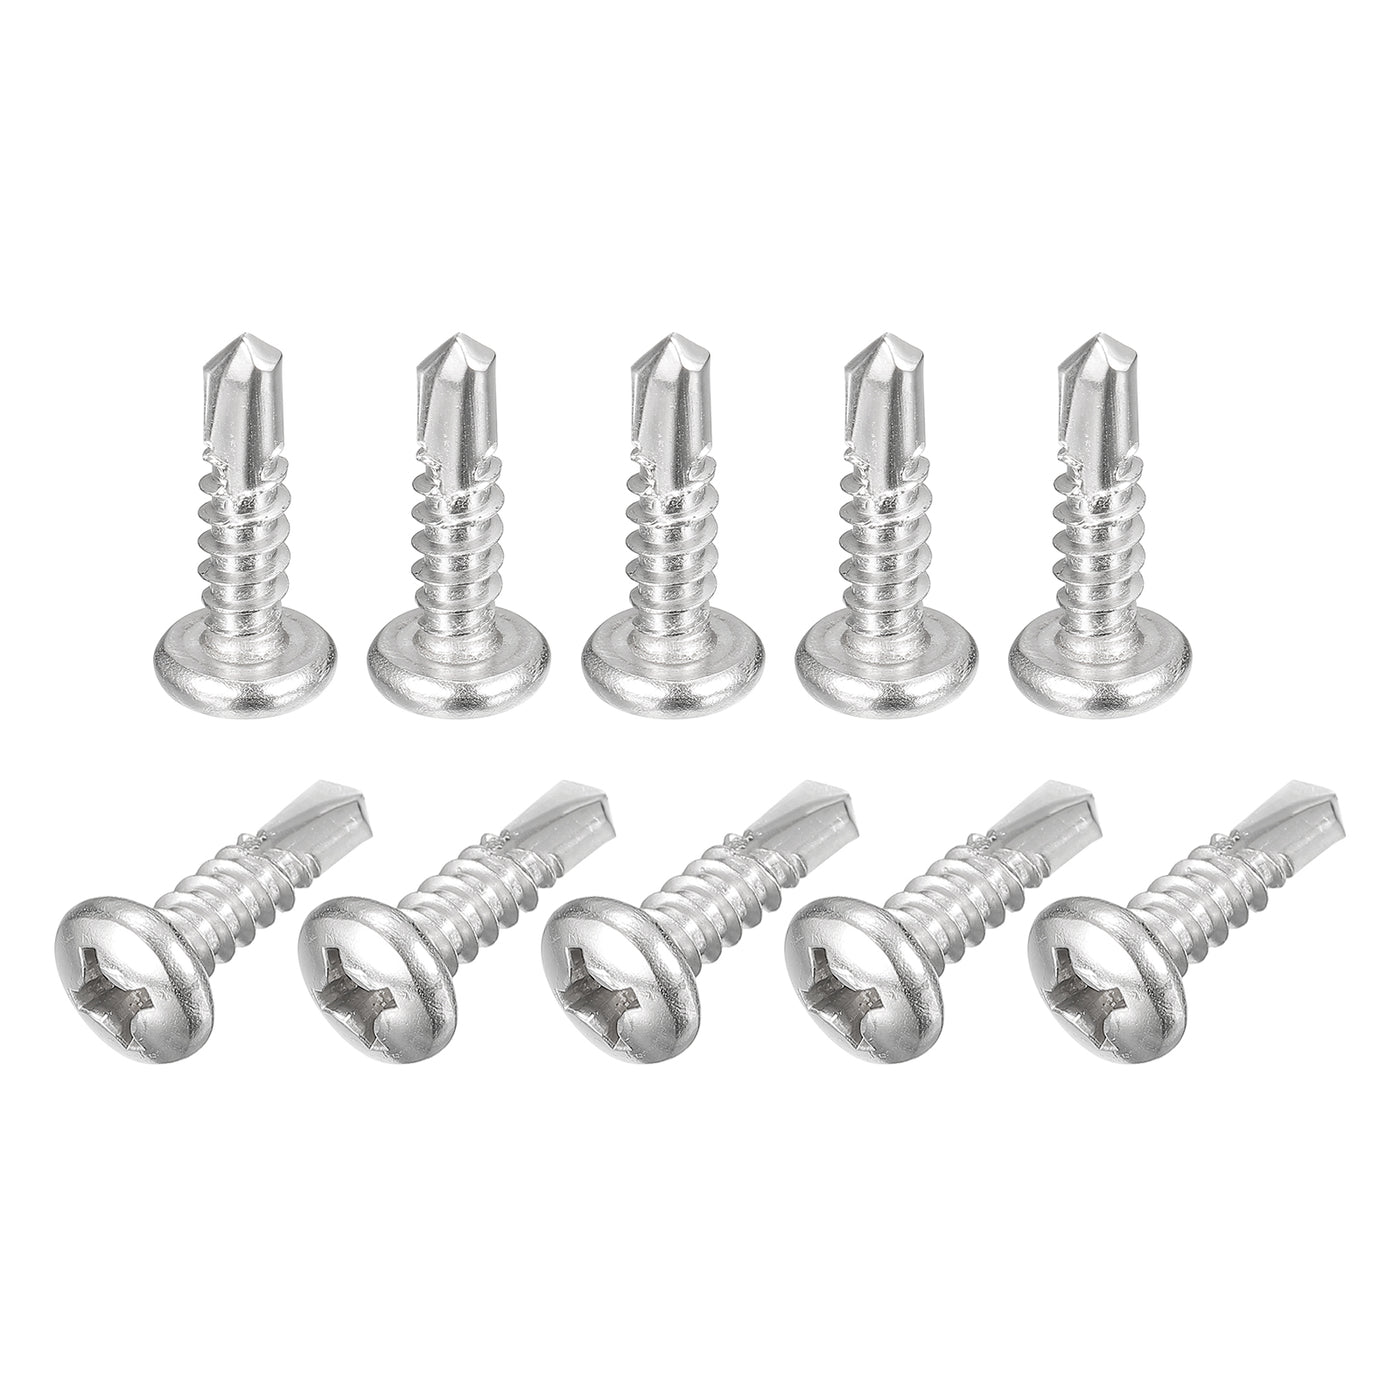 uxcell Uxcell #12 x 3/4" Self Drilling Screws, 50pcs Phillips Pan Head Self Tapping Screws